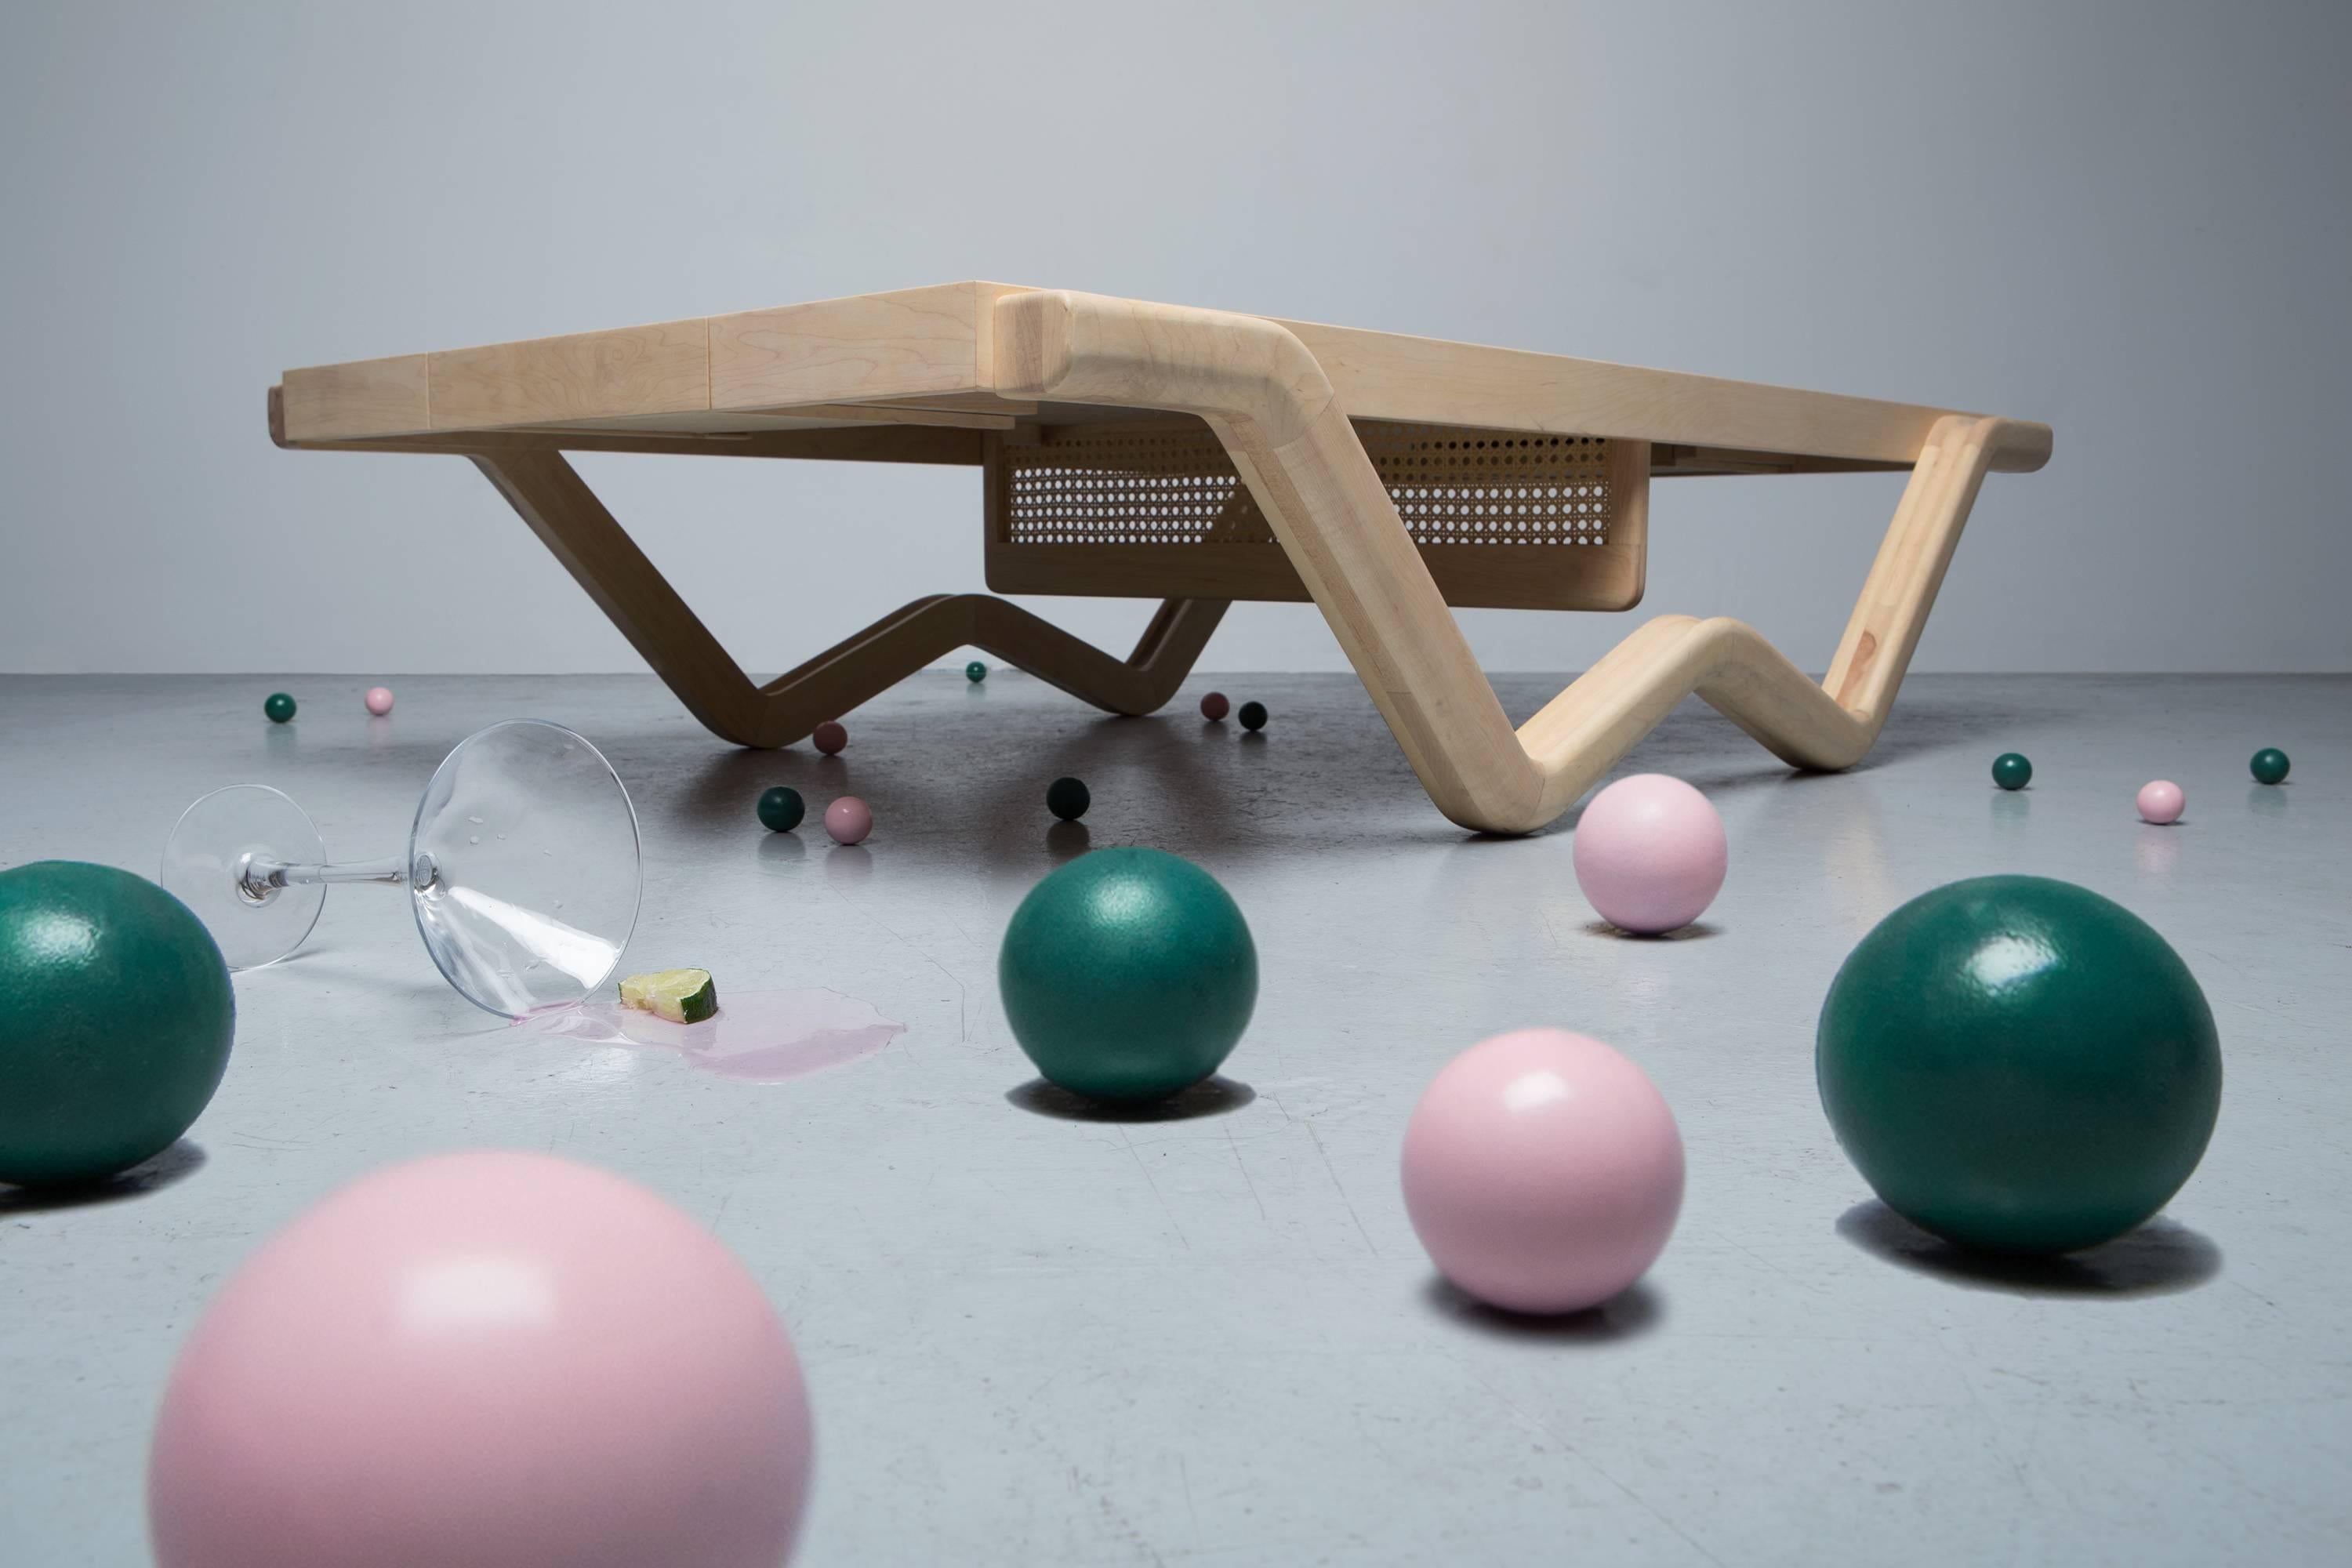 Tina Burner is a refined table that can be used for your afternoon tea or your morning match. Its playful design transforms into a ping pong table. Open the drawer and grab a racket, let’s play! Its rattan net has two positions and once set up, it